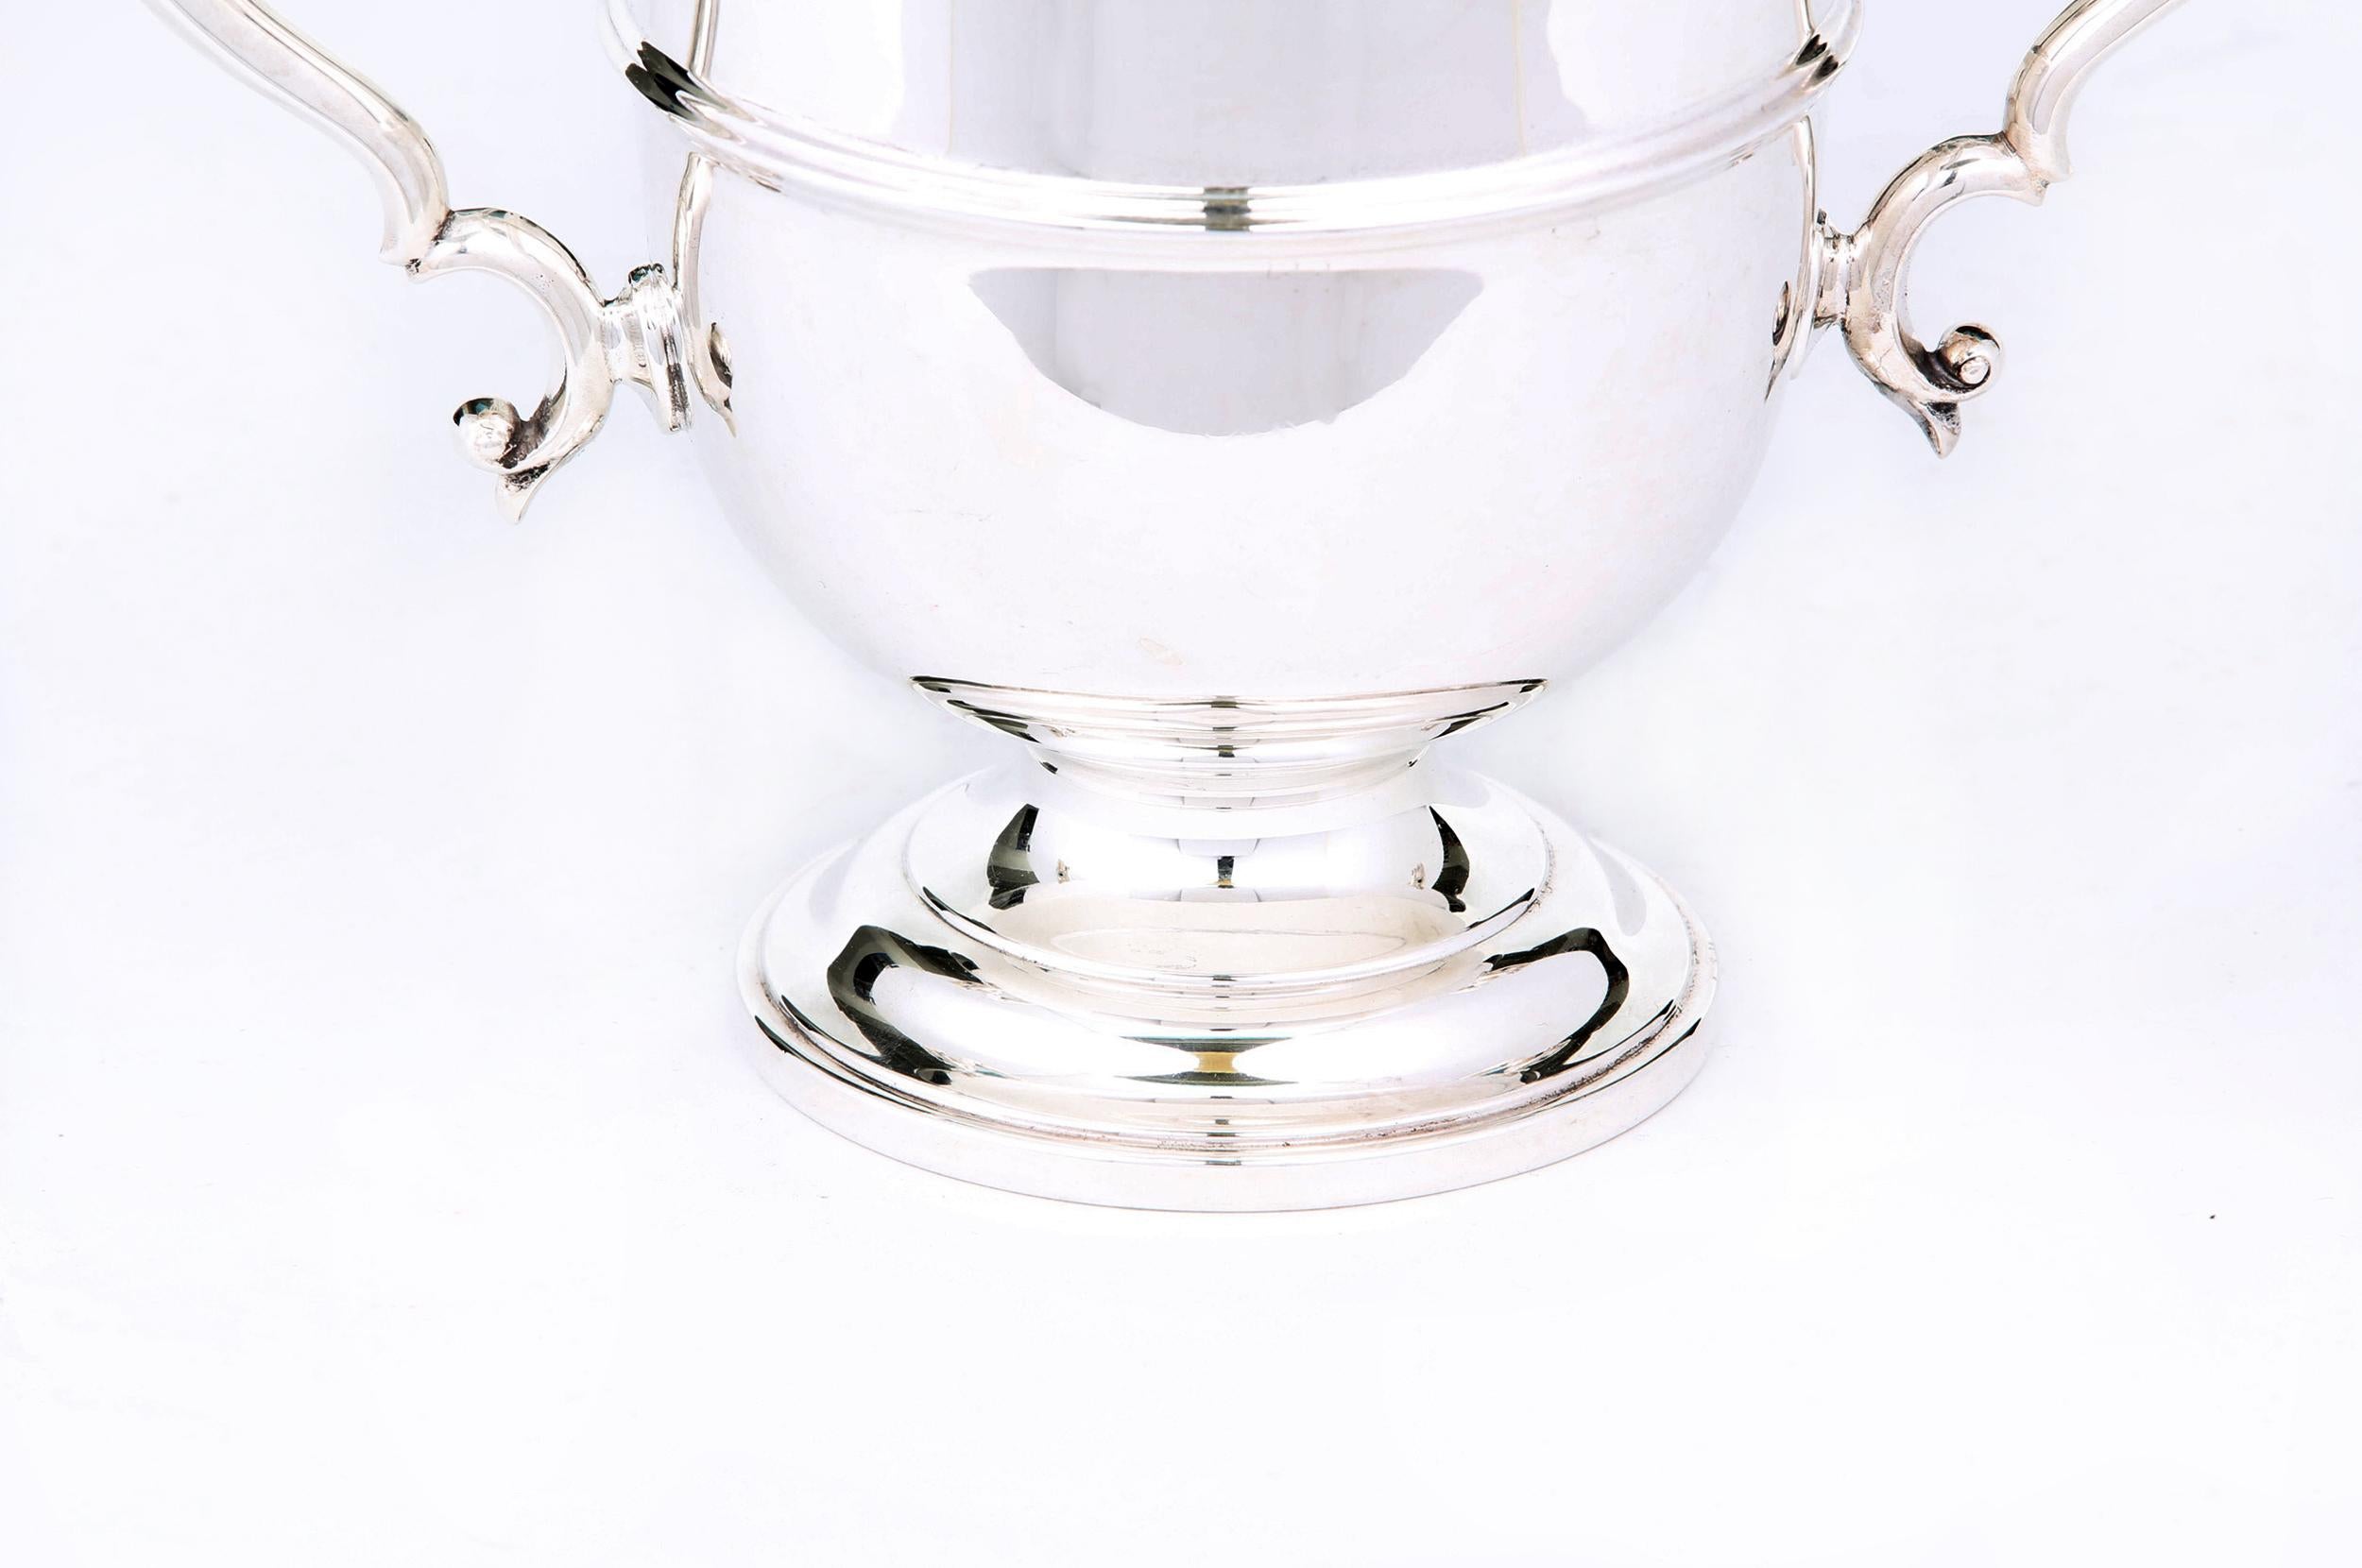 English silver plated barware / tableware ice bucket with exterior design details and side handles. The ice bucket is in great condition. Maker's mark undersigned. The ice bucket is about 10.5 inches diameter x 7.5 inches tall.